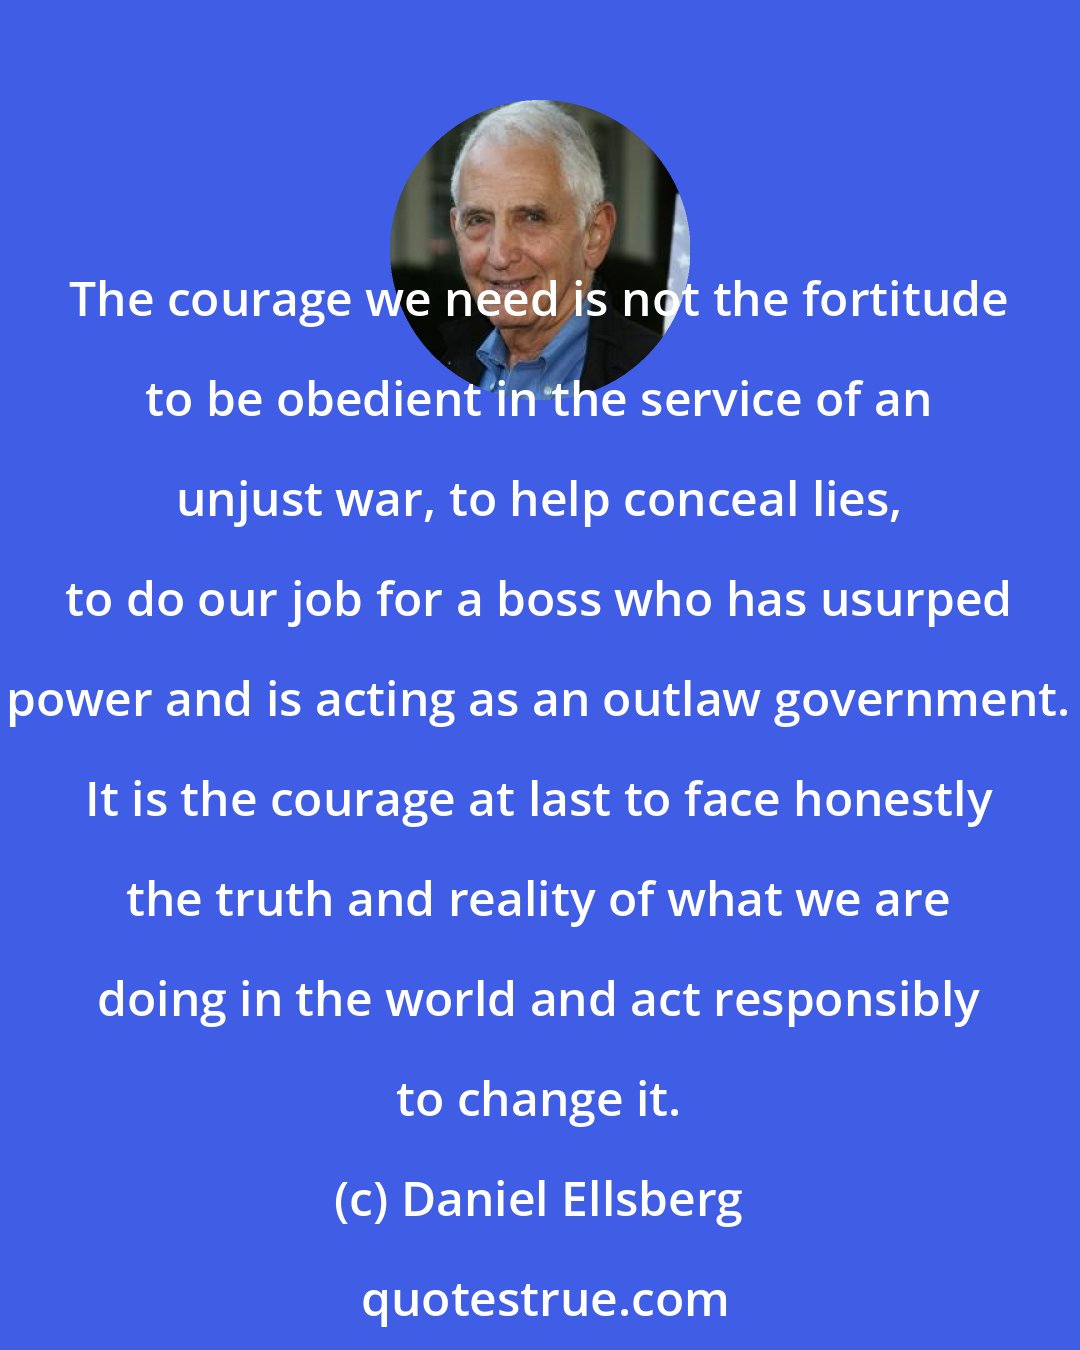 Daniel Ellsberg: The courage we need is not the fortitude to be obedient in the service of an unjust war, to help conceal lies, to do our job for a boss who has usurped power and is acting as an outlaw government. It is the courage at last to face honestly the truth and reality of what we are doing in the world and act responsibly to change it.